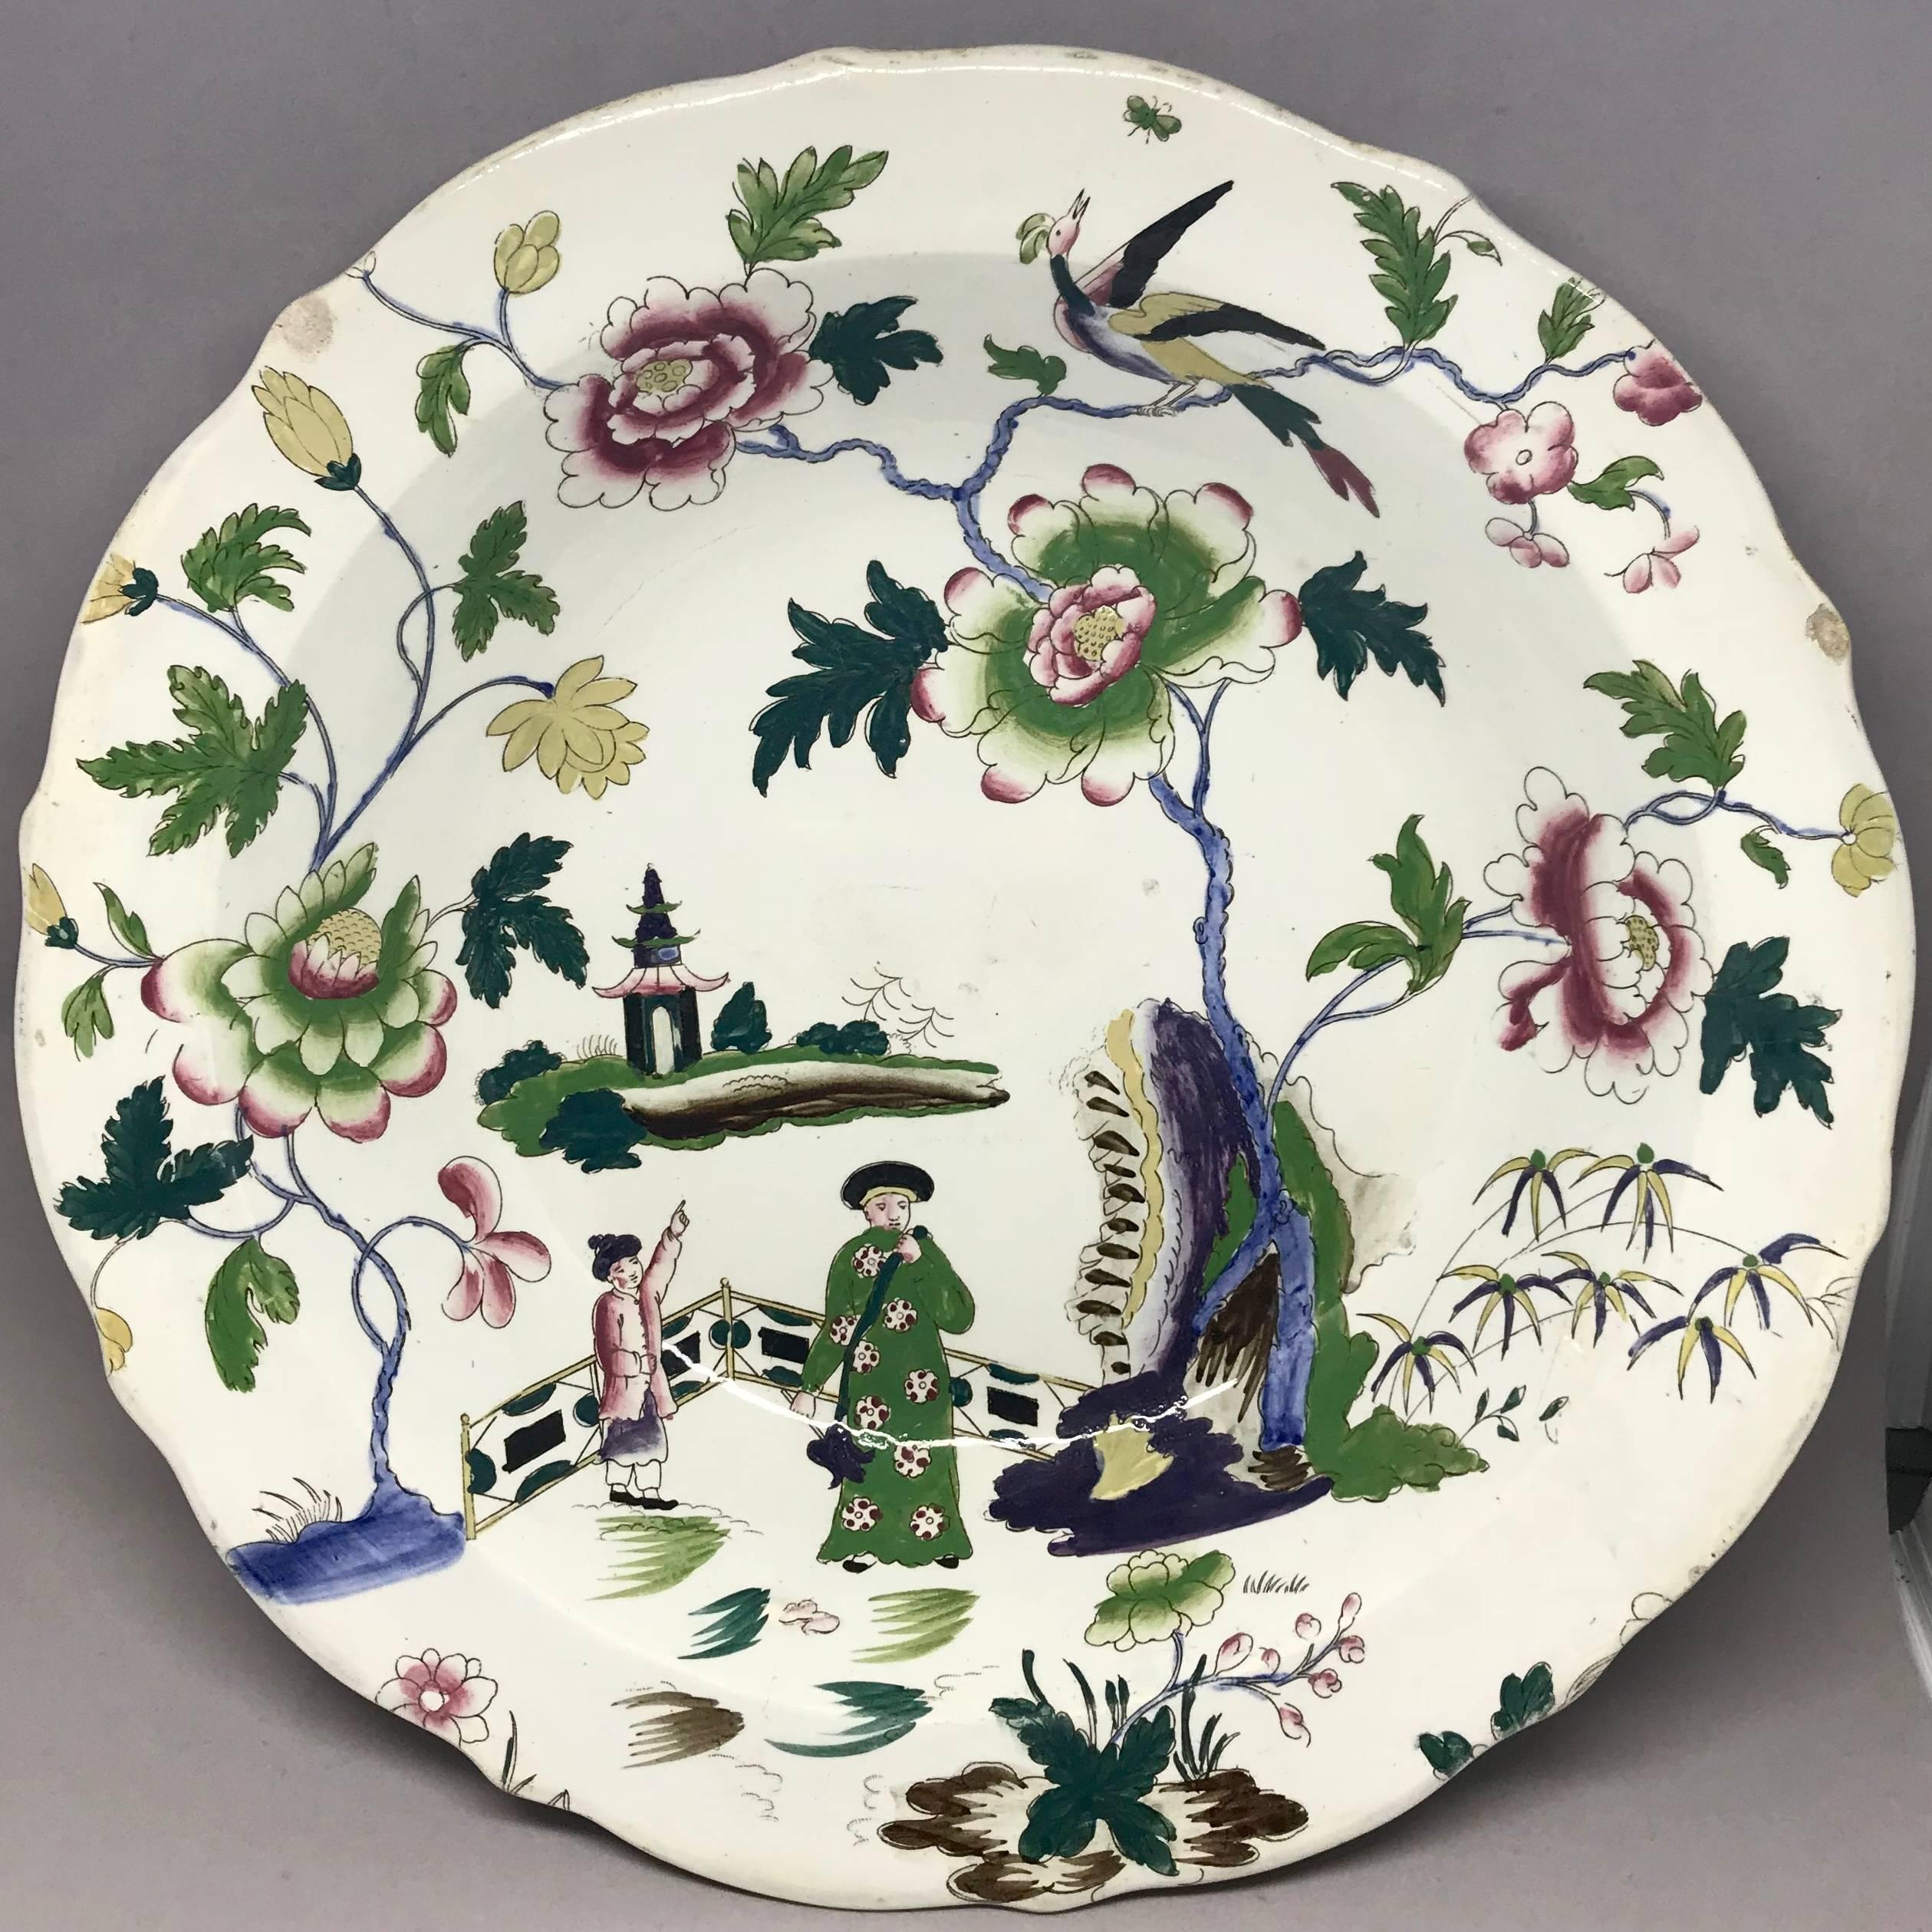 English chinoiserie bowl with flowers birds and figures with pagoda in landscape. Impressed marks for Bestgoods, England, circa 1840s. Dimension: 12